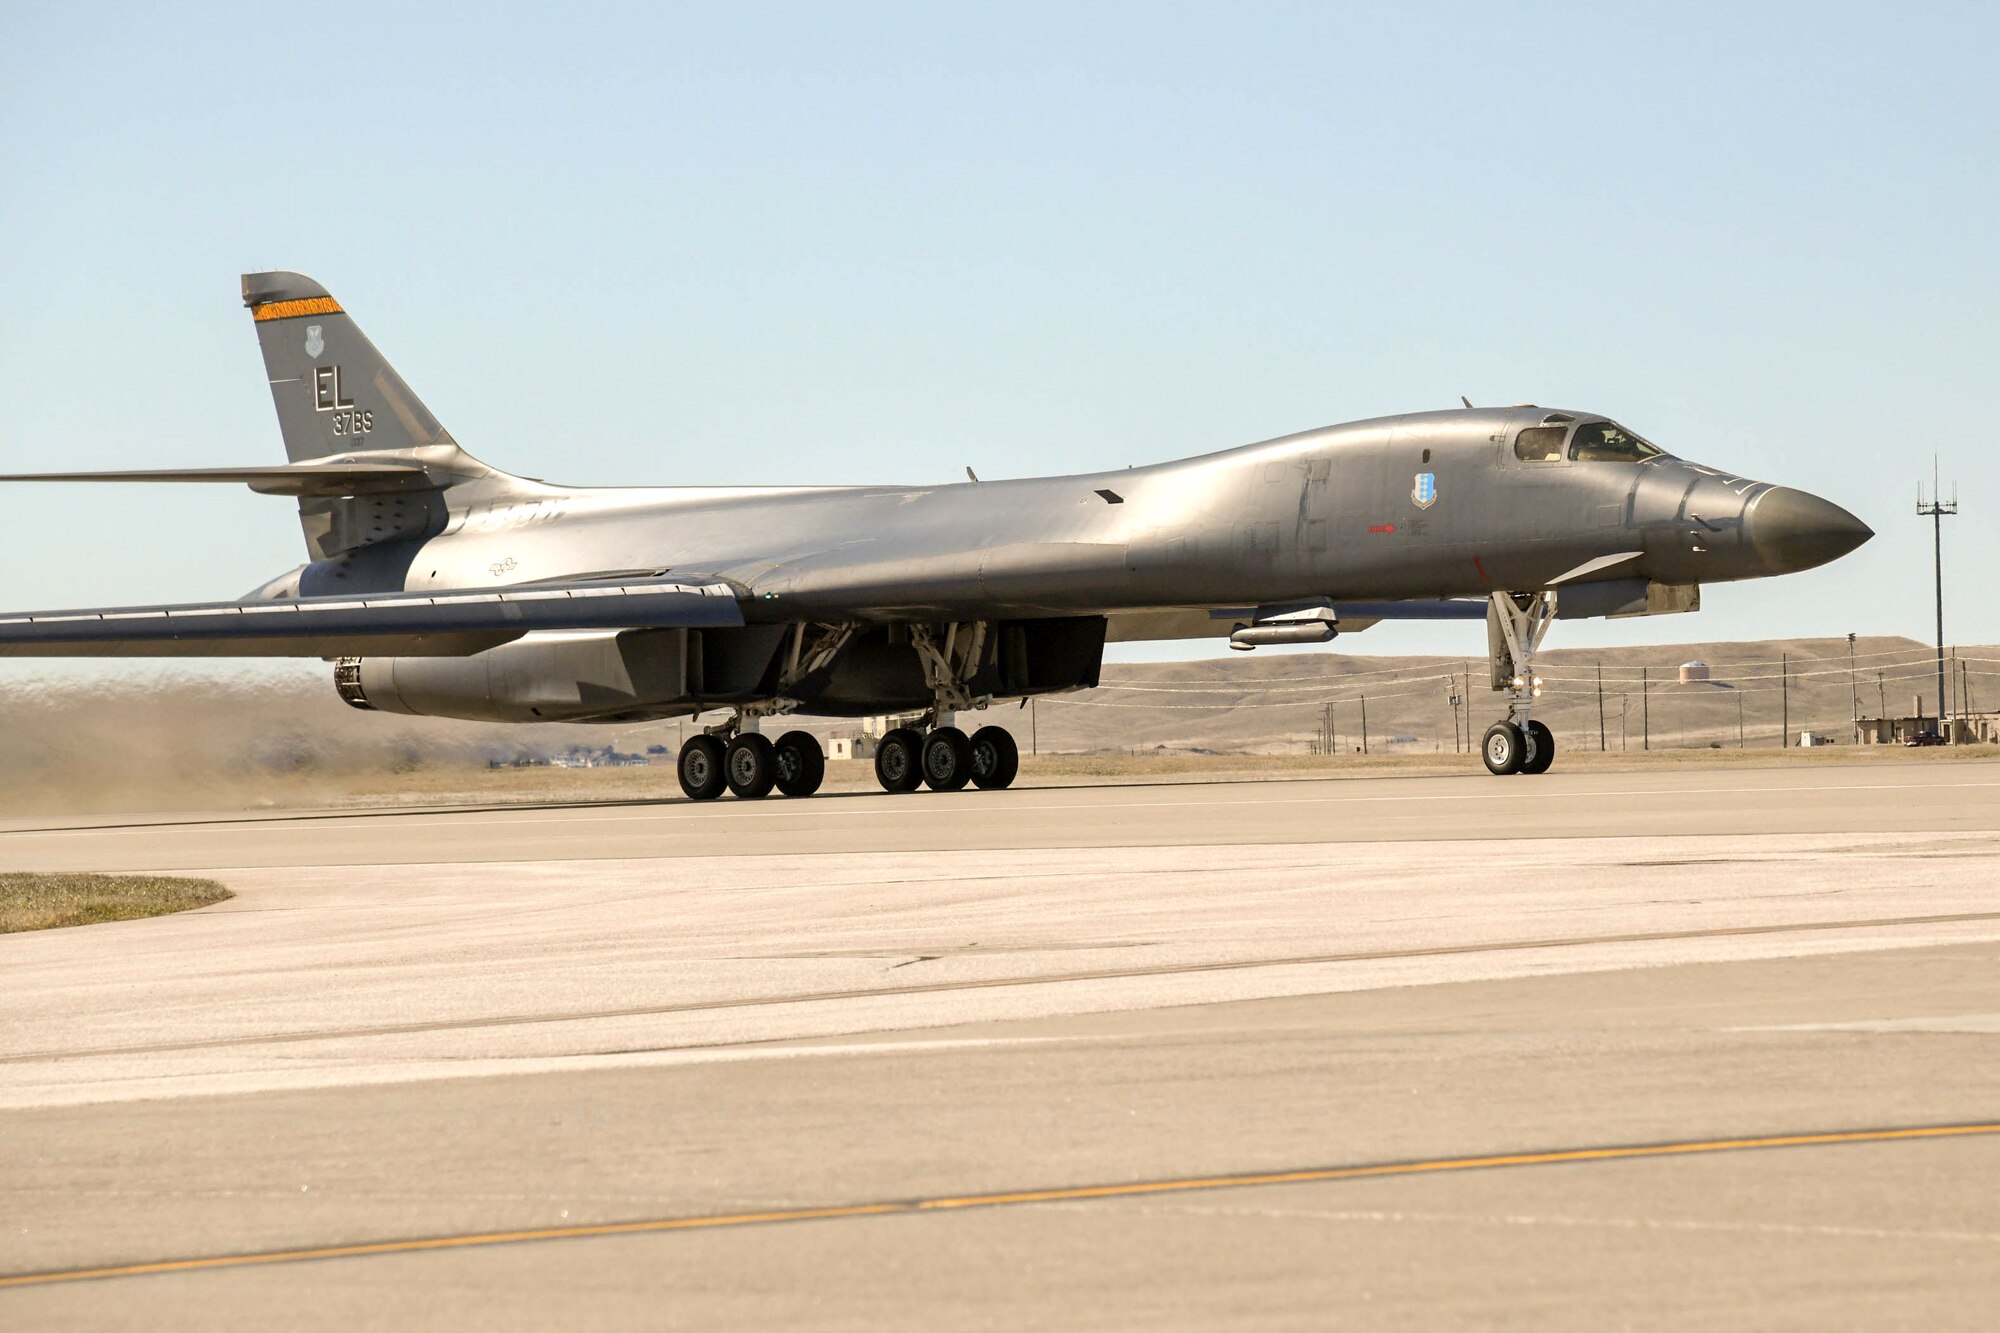 A U.S. Air Force B-1B Lancer taxis prior to departing Ellsworth Air Force Base, S.D., April 21, 2020. The B-1 bomber flew from the continental United States and integrated with the Koku Jieitai (Japan Air Self Defense Force or JASDF) to conduct bilateral and theater familiarization training near Japan. (U.S. Air Force photo by Senior Airman Michael Jones)